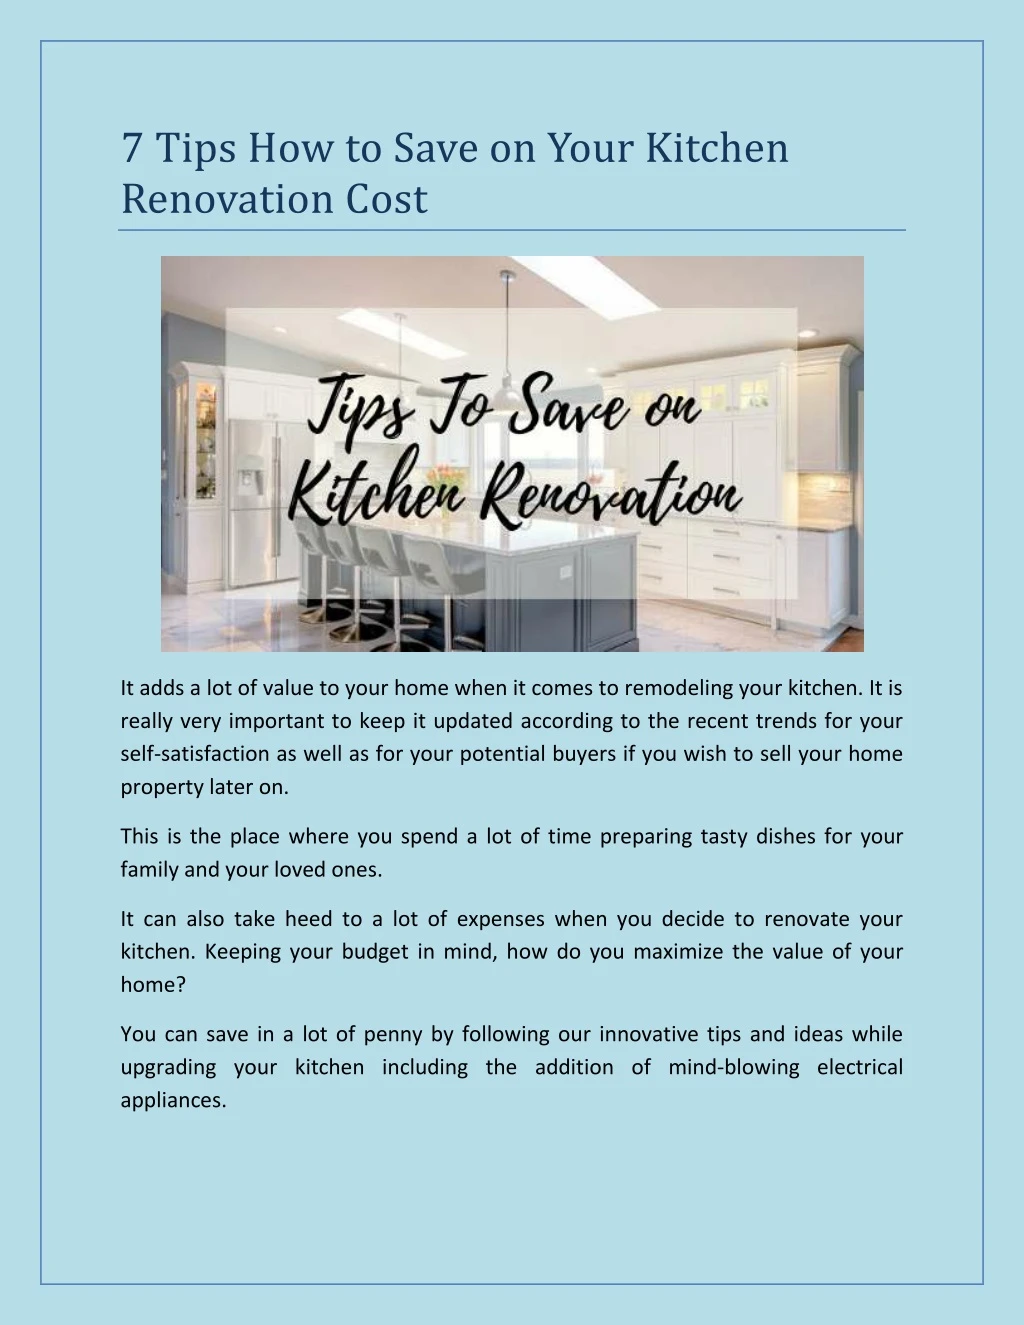 7 tips how to save on your kitchen renovation cost